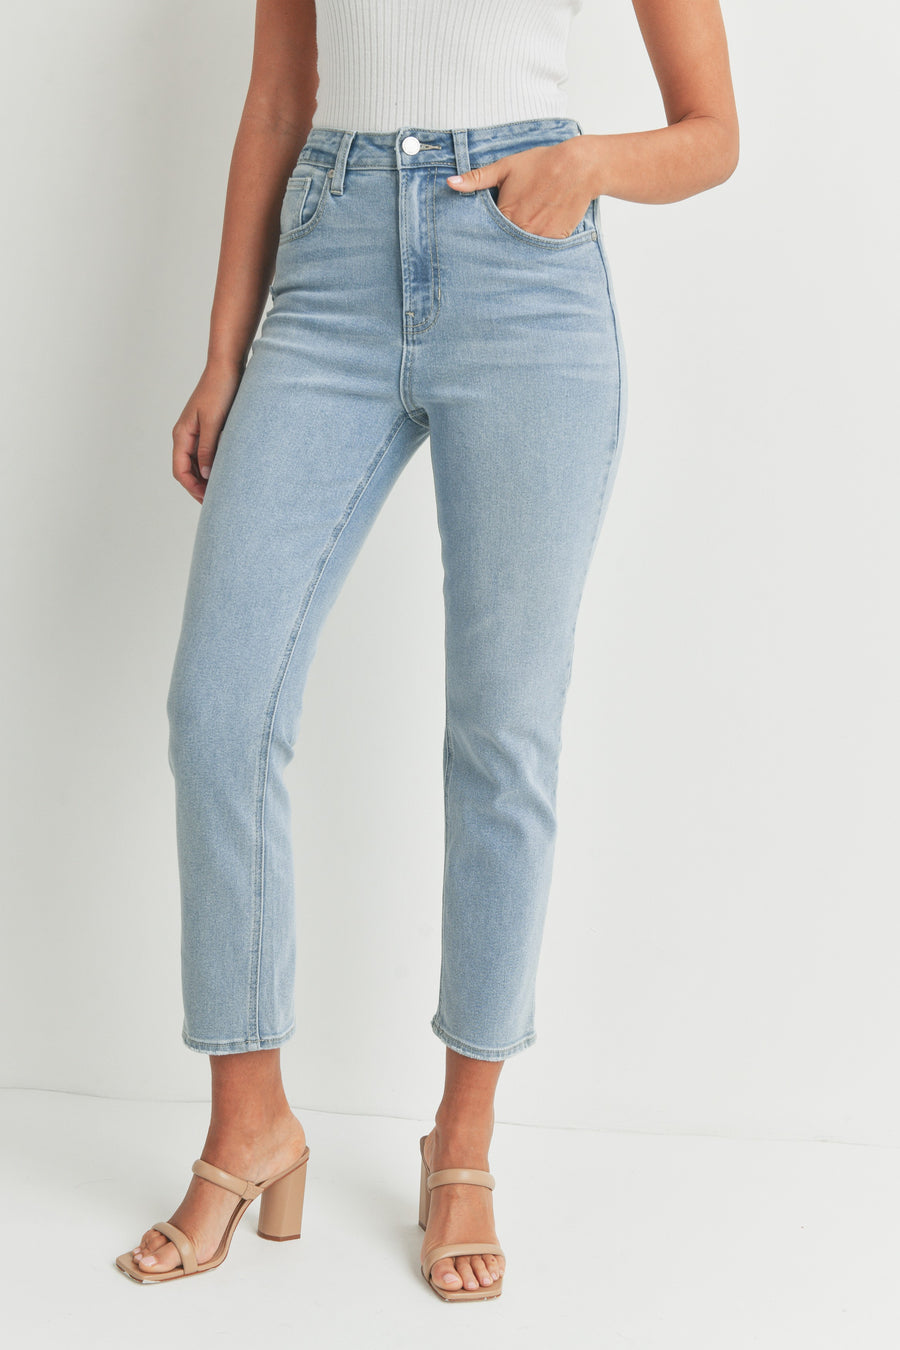 Light denim high rise and slim fit jeans.